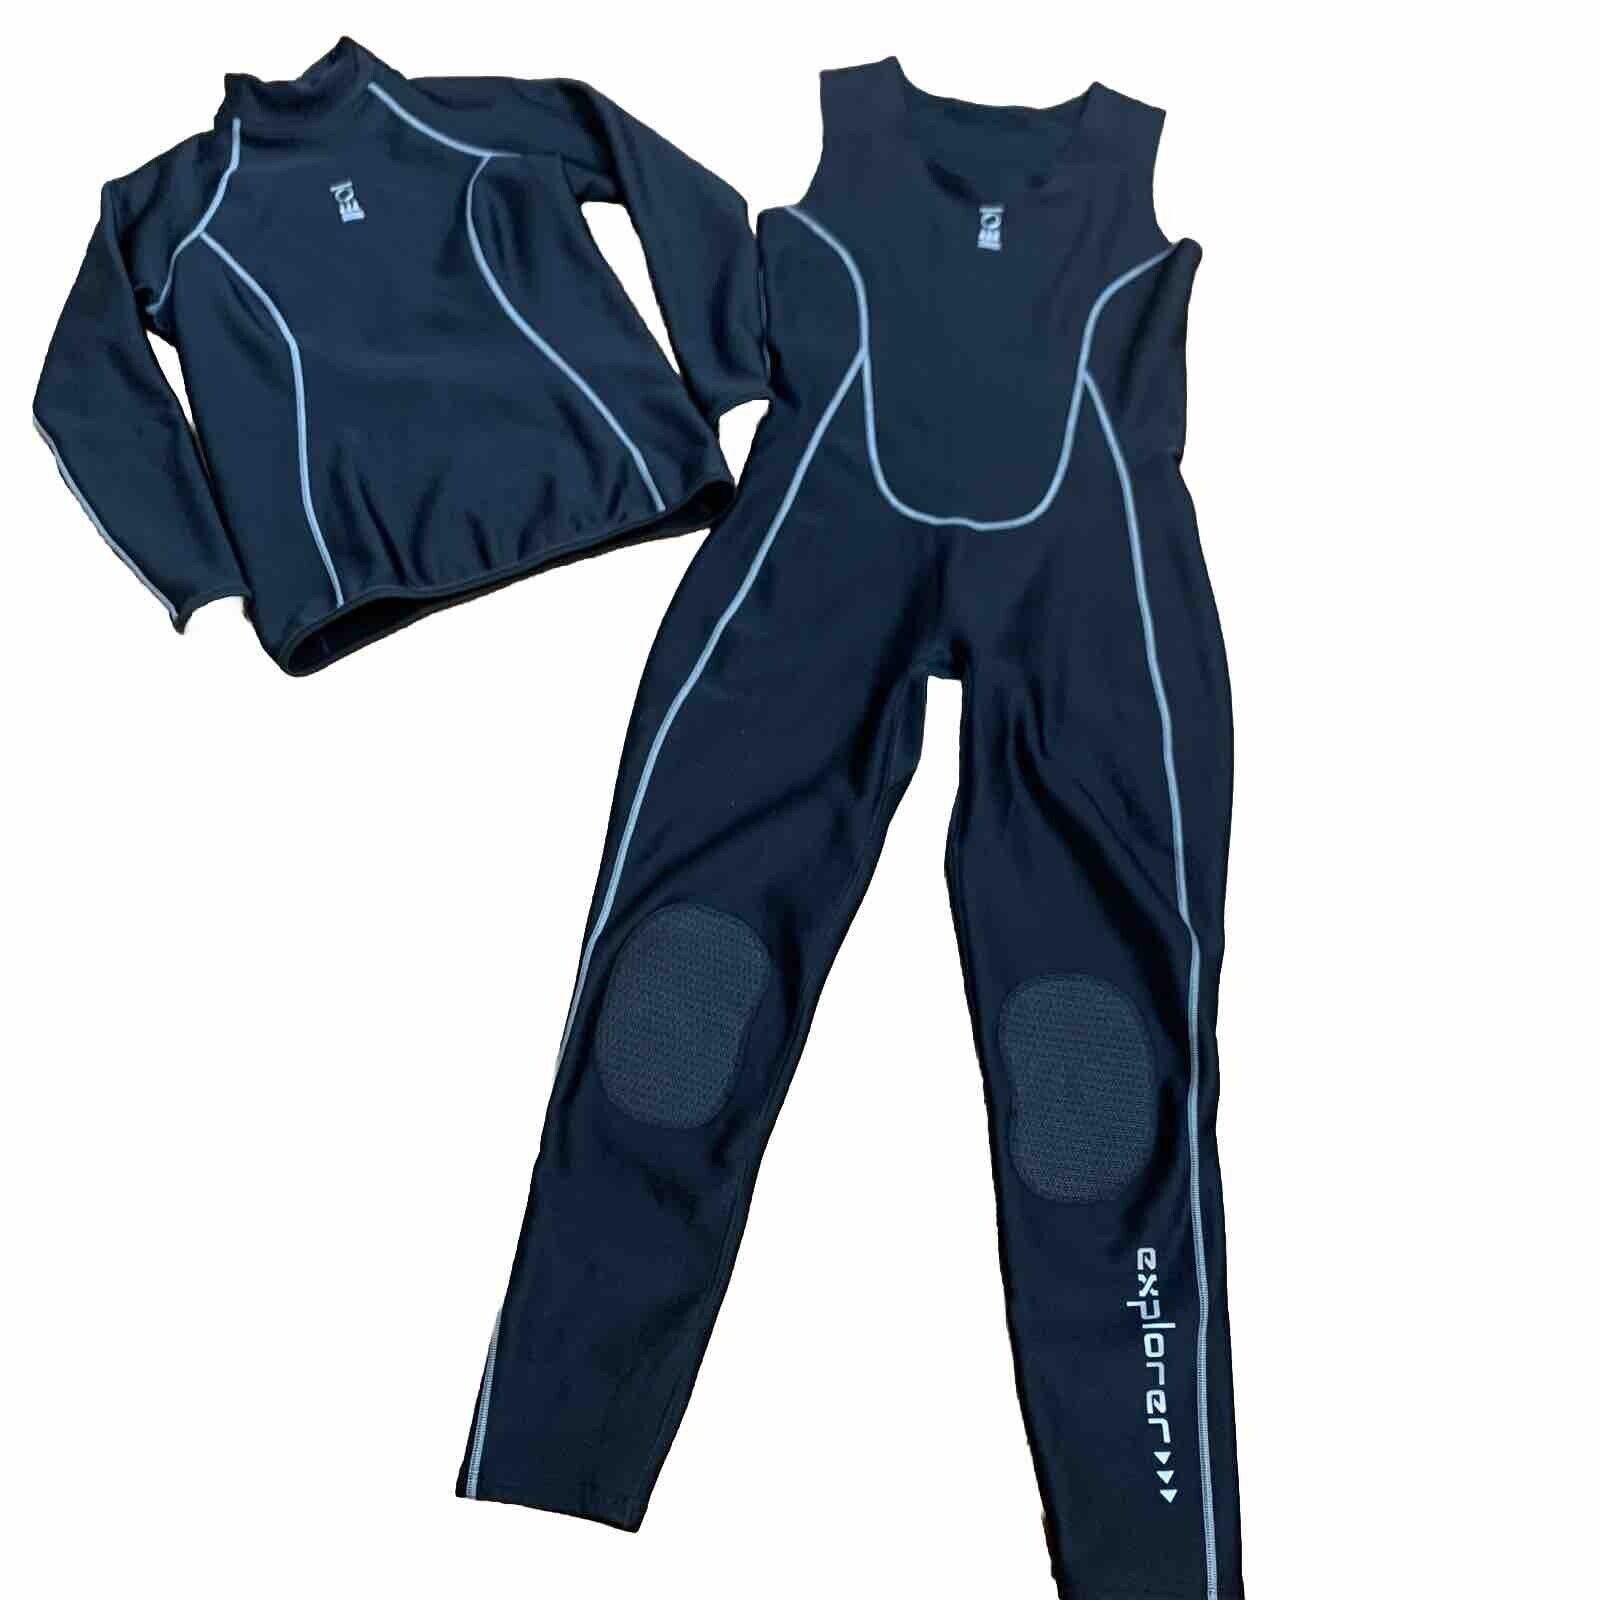 Fourth Element Thermocline Set (Overalls and Long Sleeve Top) UK 16-18 USA 14-16 oRxzwCWcA